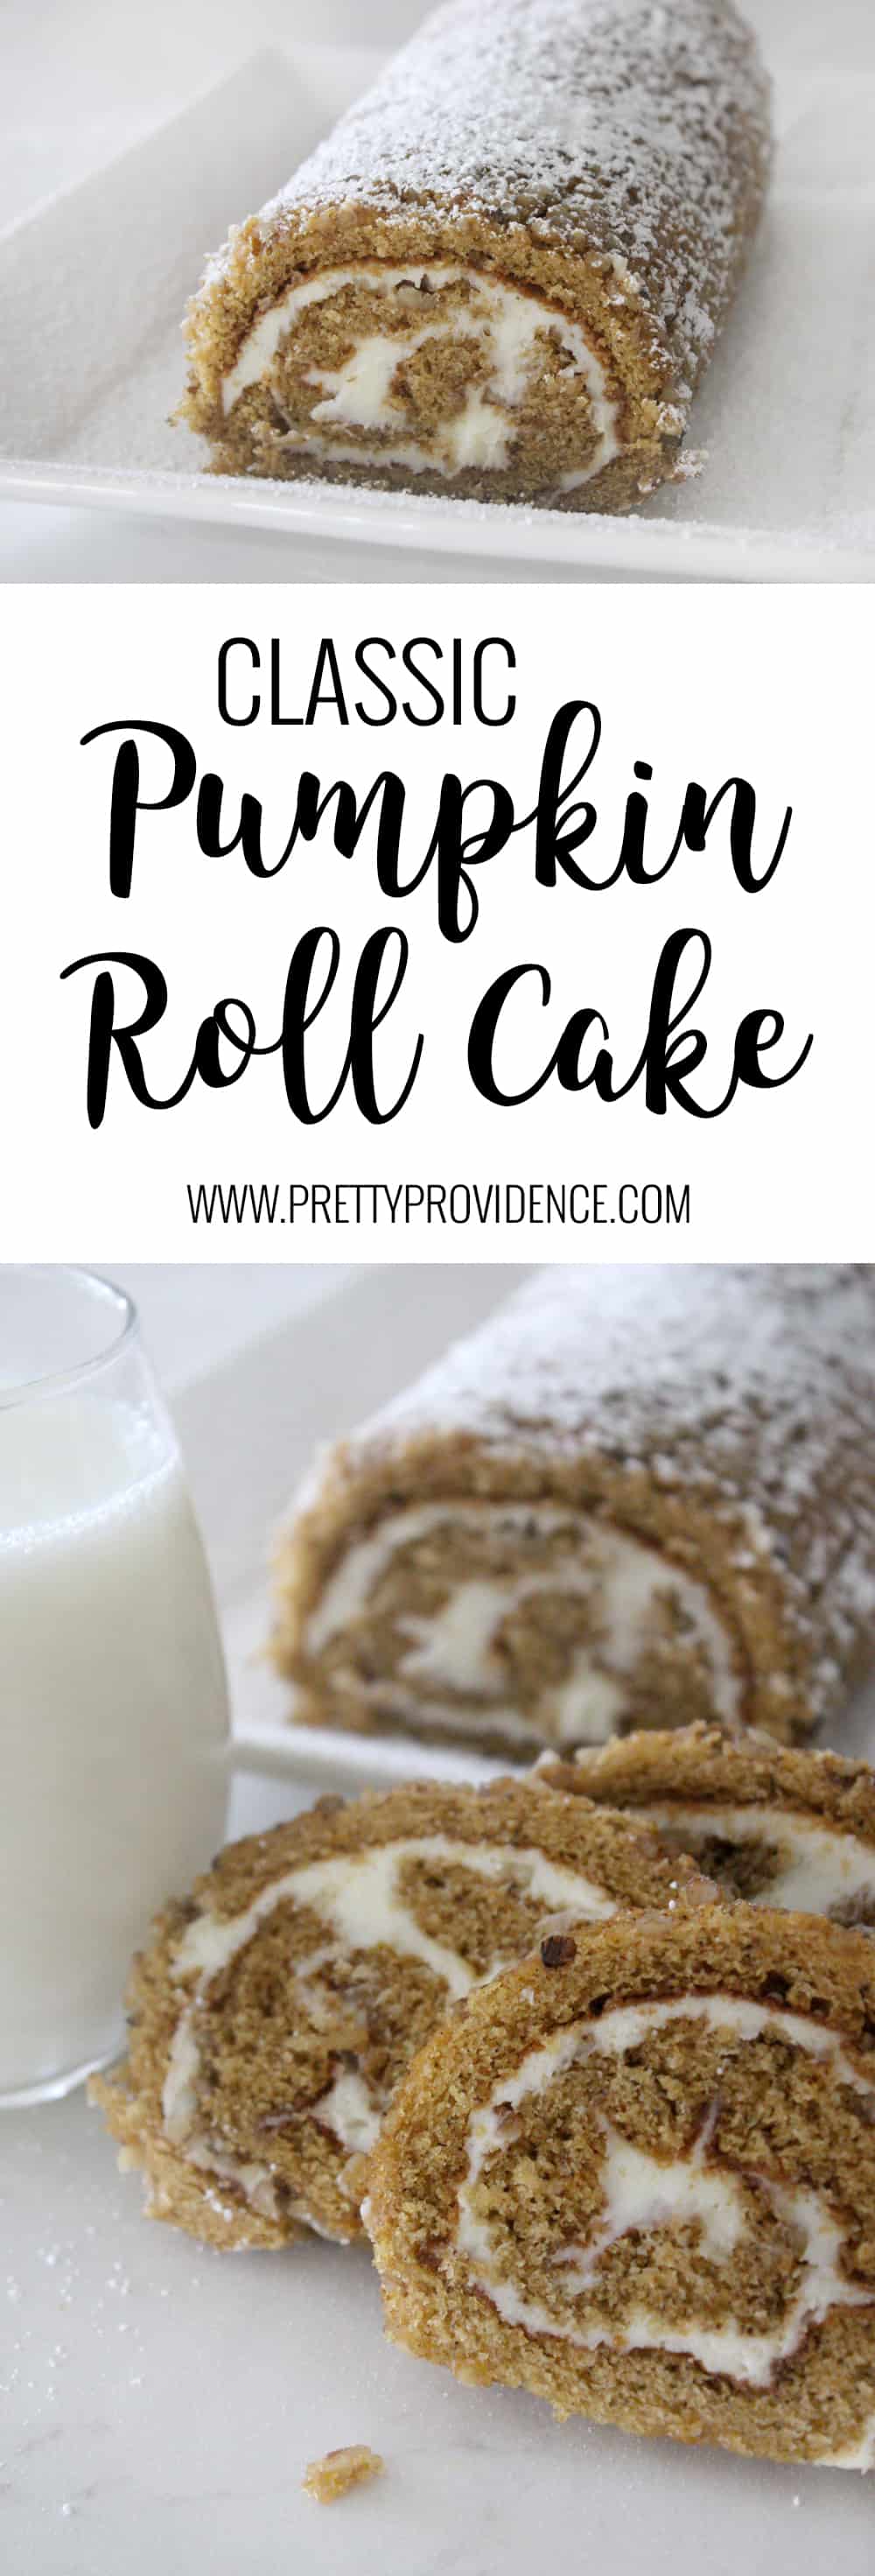 FIVE STARS for this easy classic pumpkin roll cake! Literally melt in your mouth heaven! Don't be intimidated, you can totally do this! 